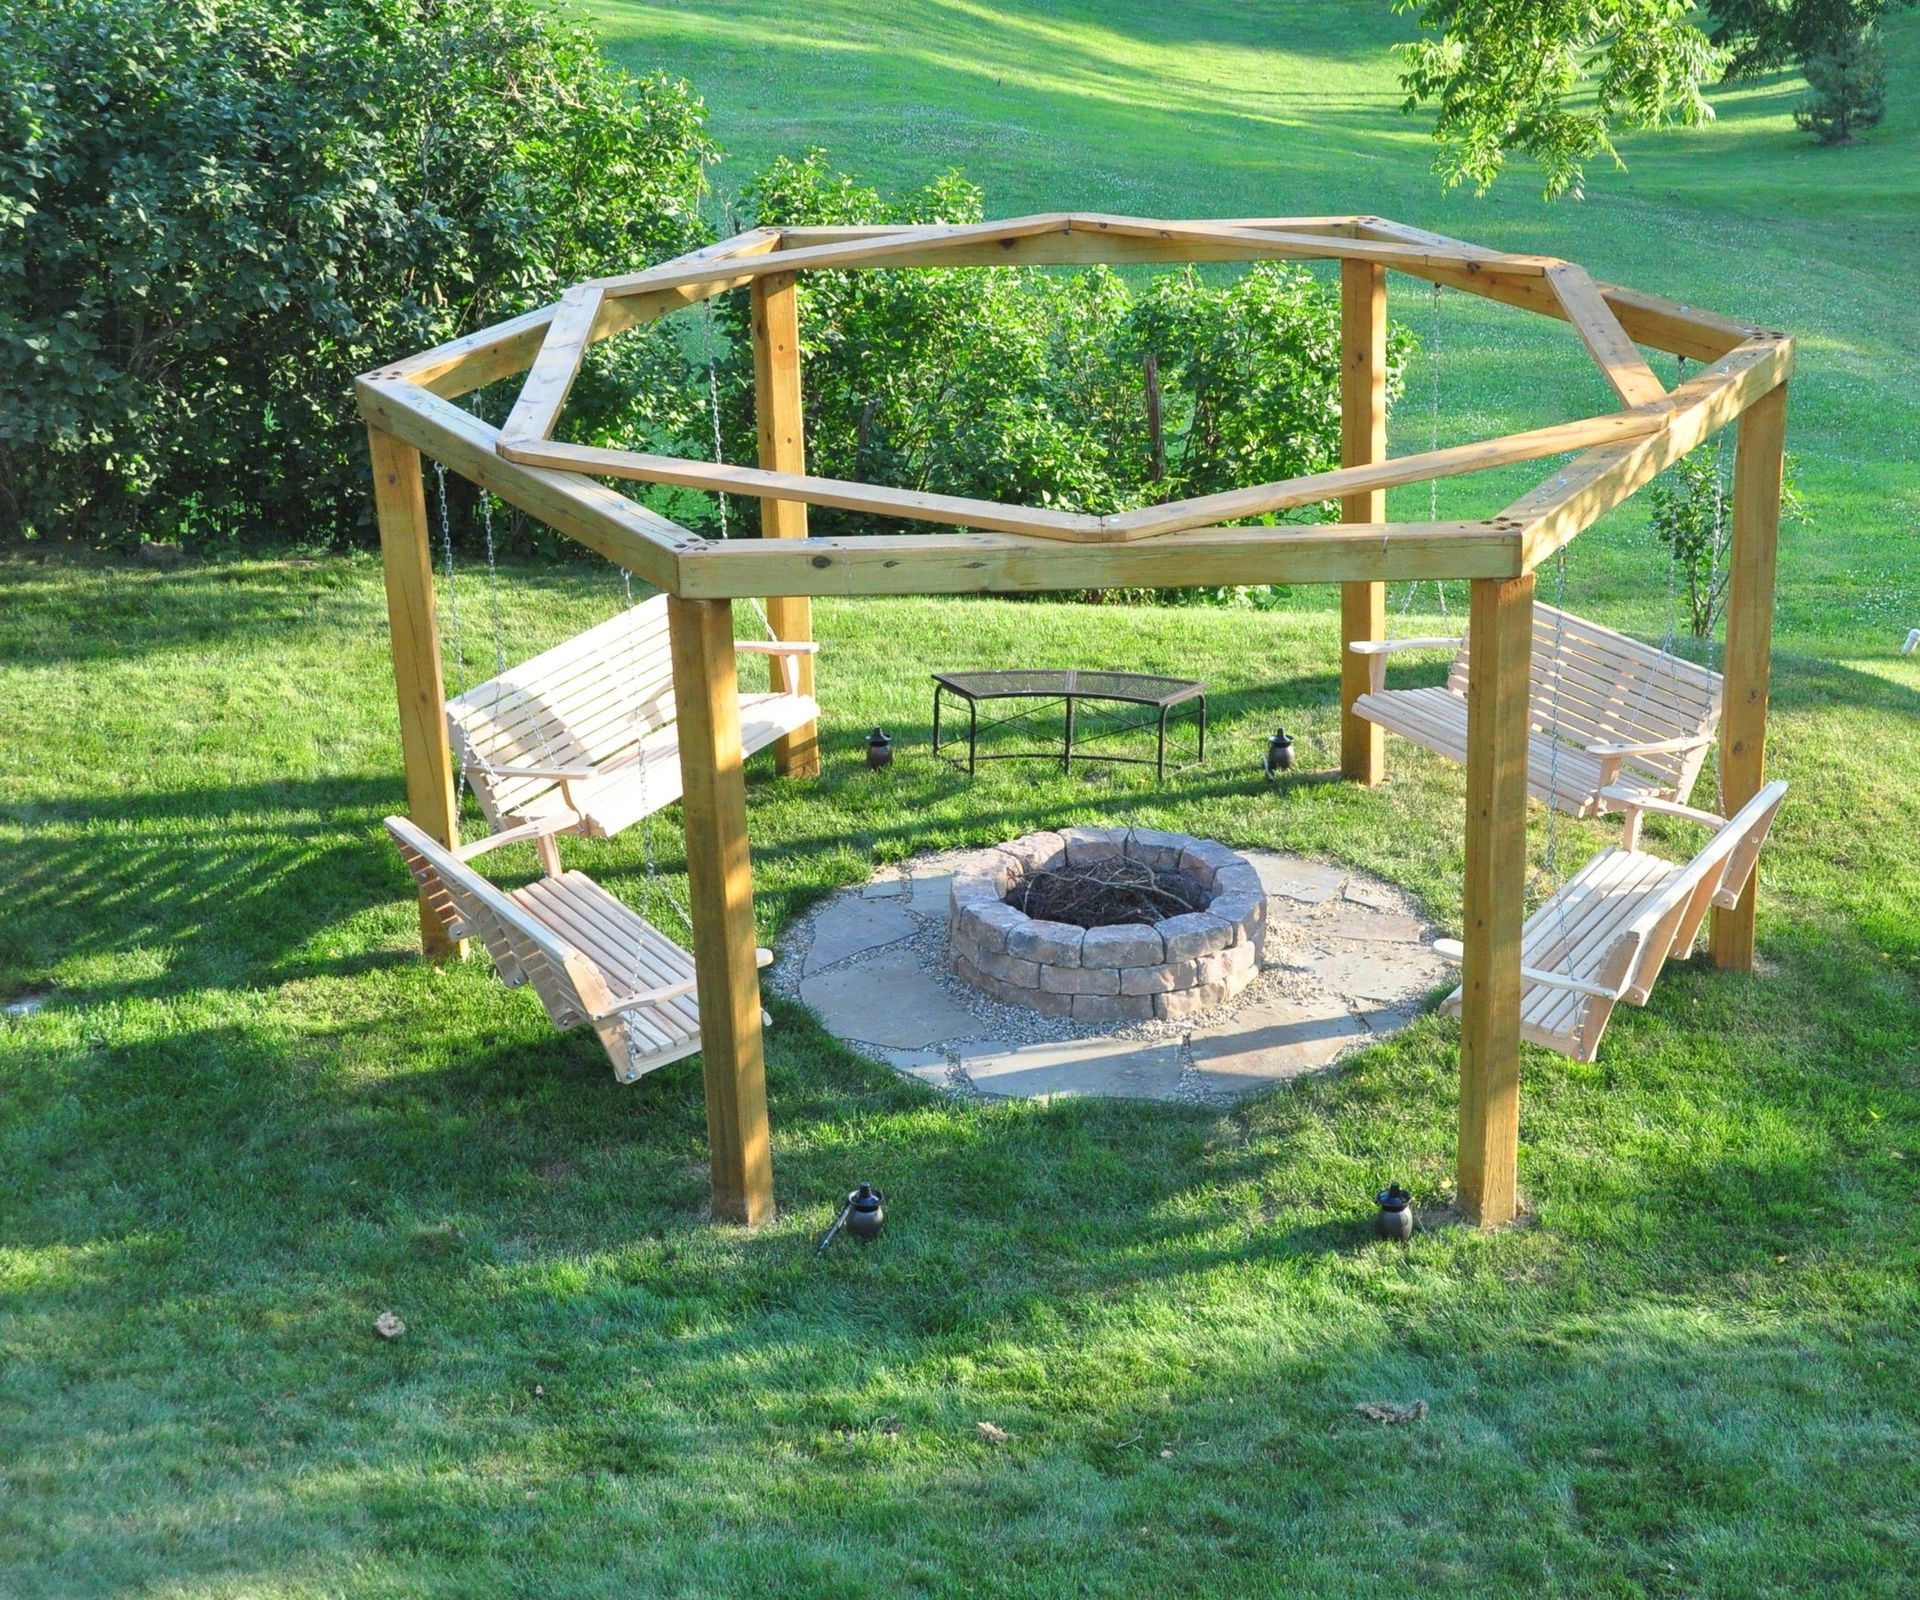 Fire pit and swings